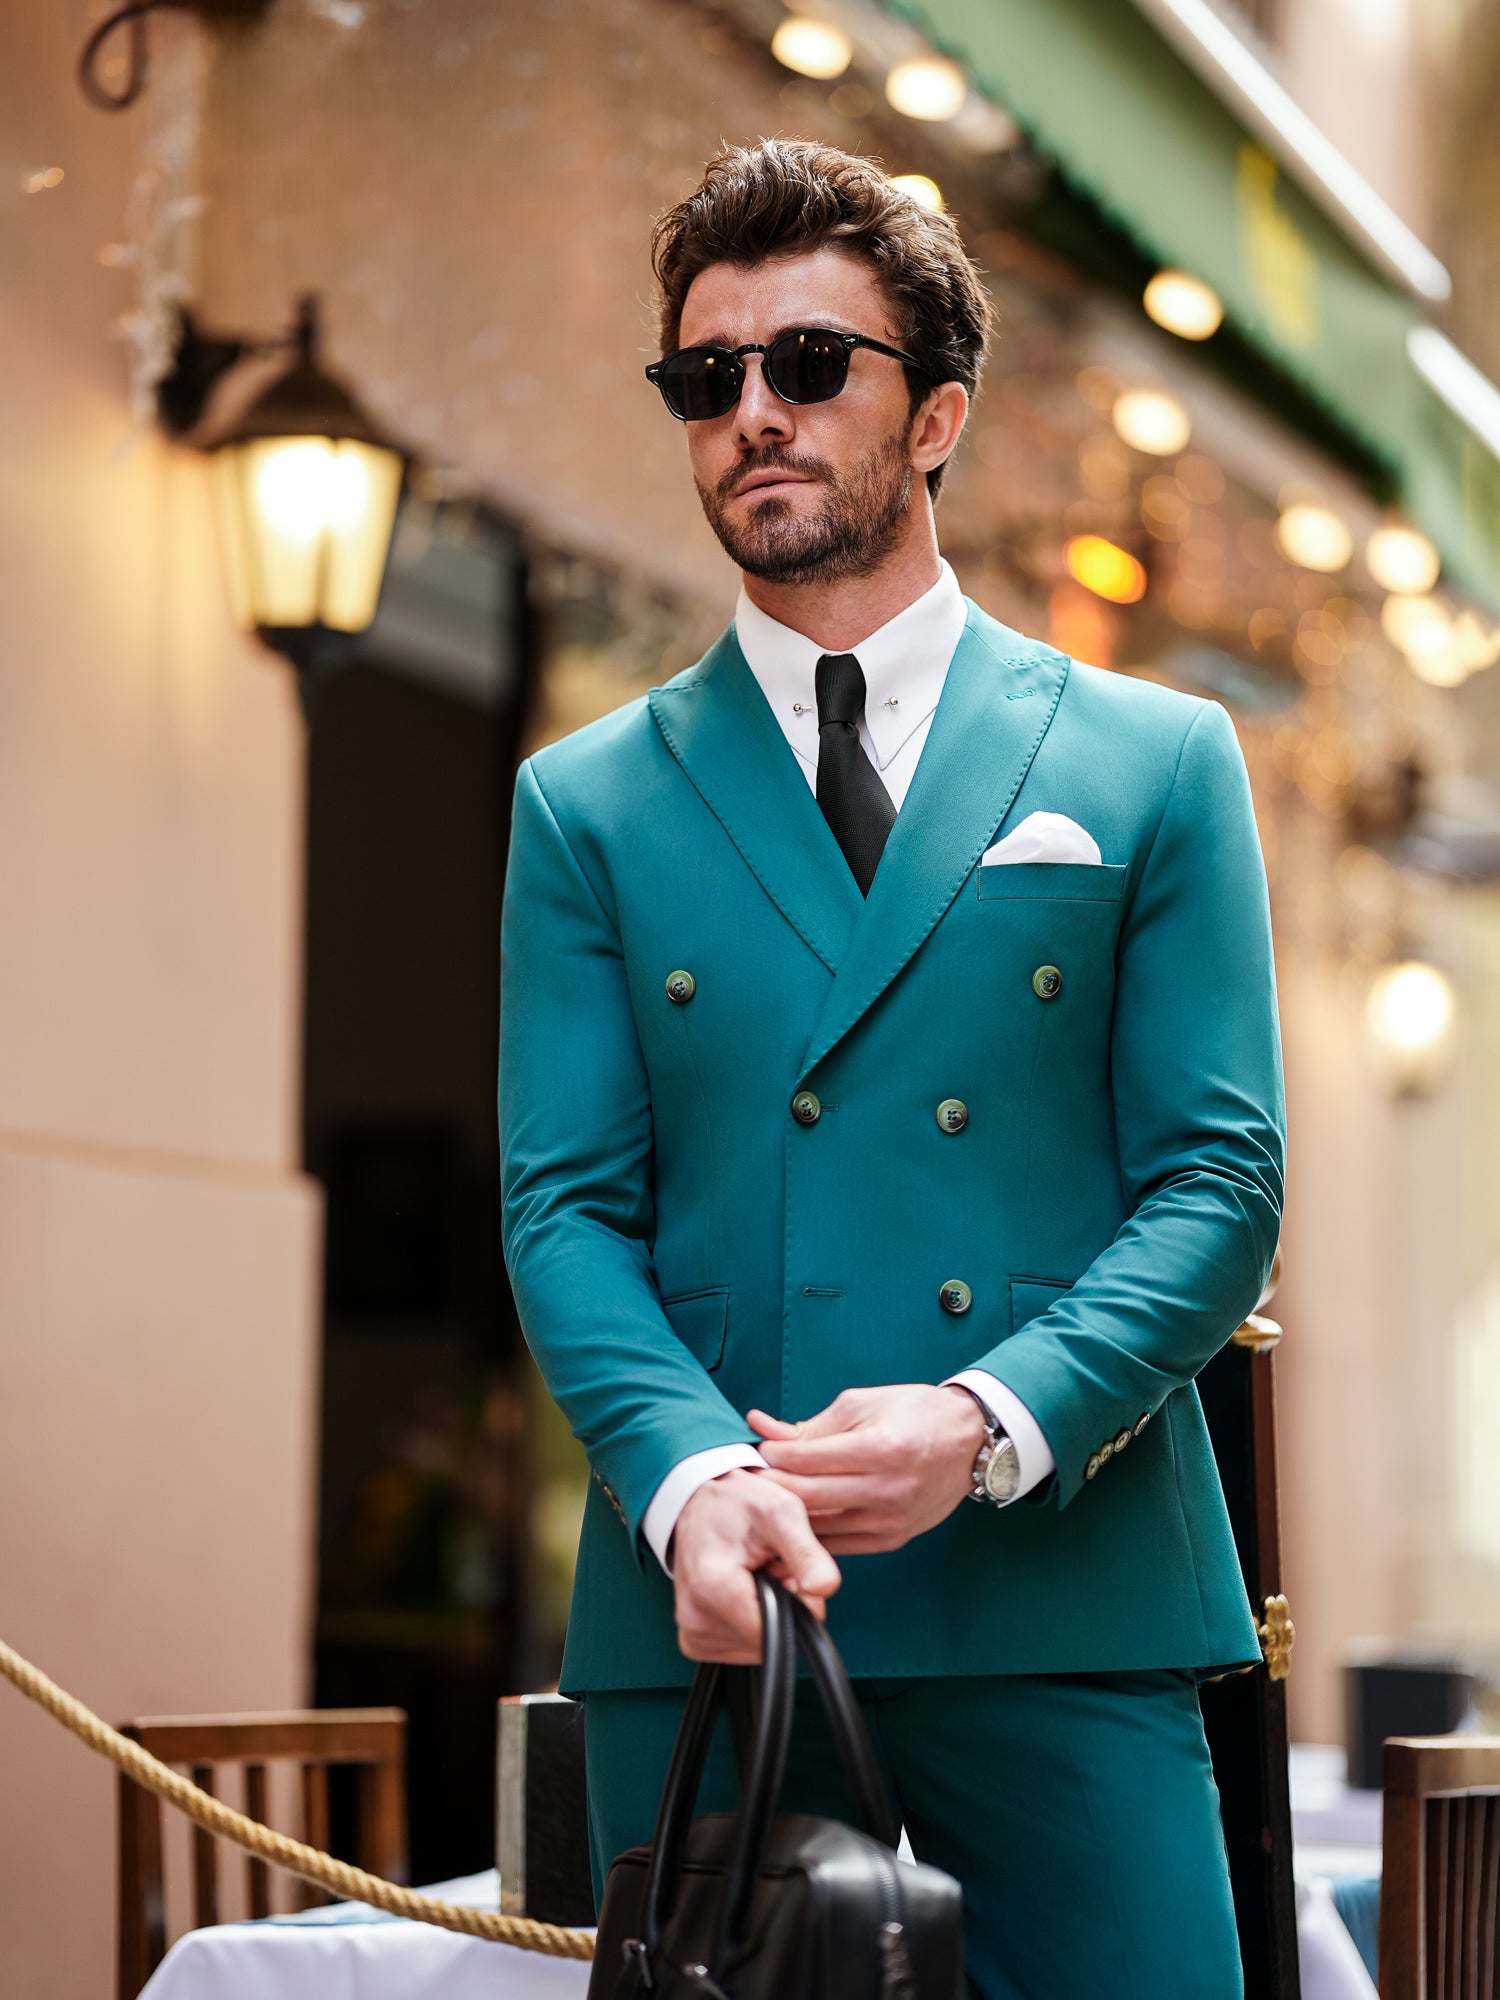 Green Double Breasted Suit 2-Piece